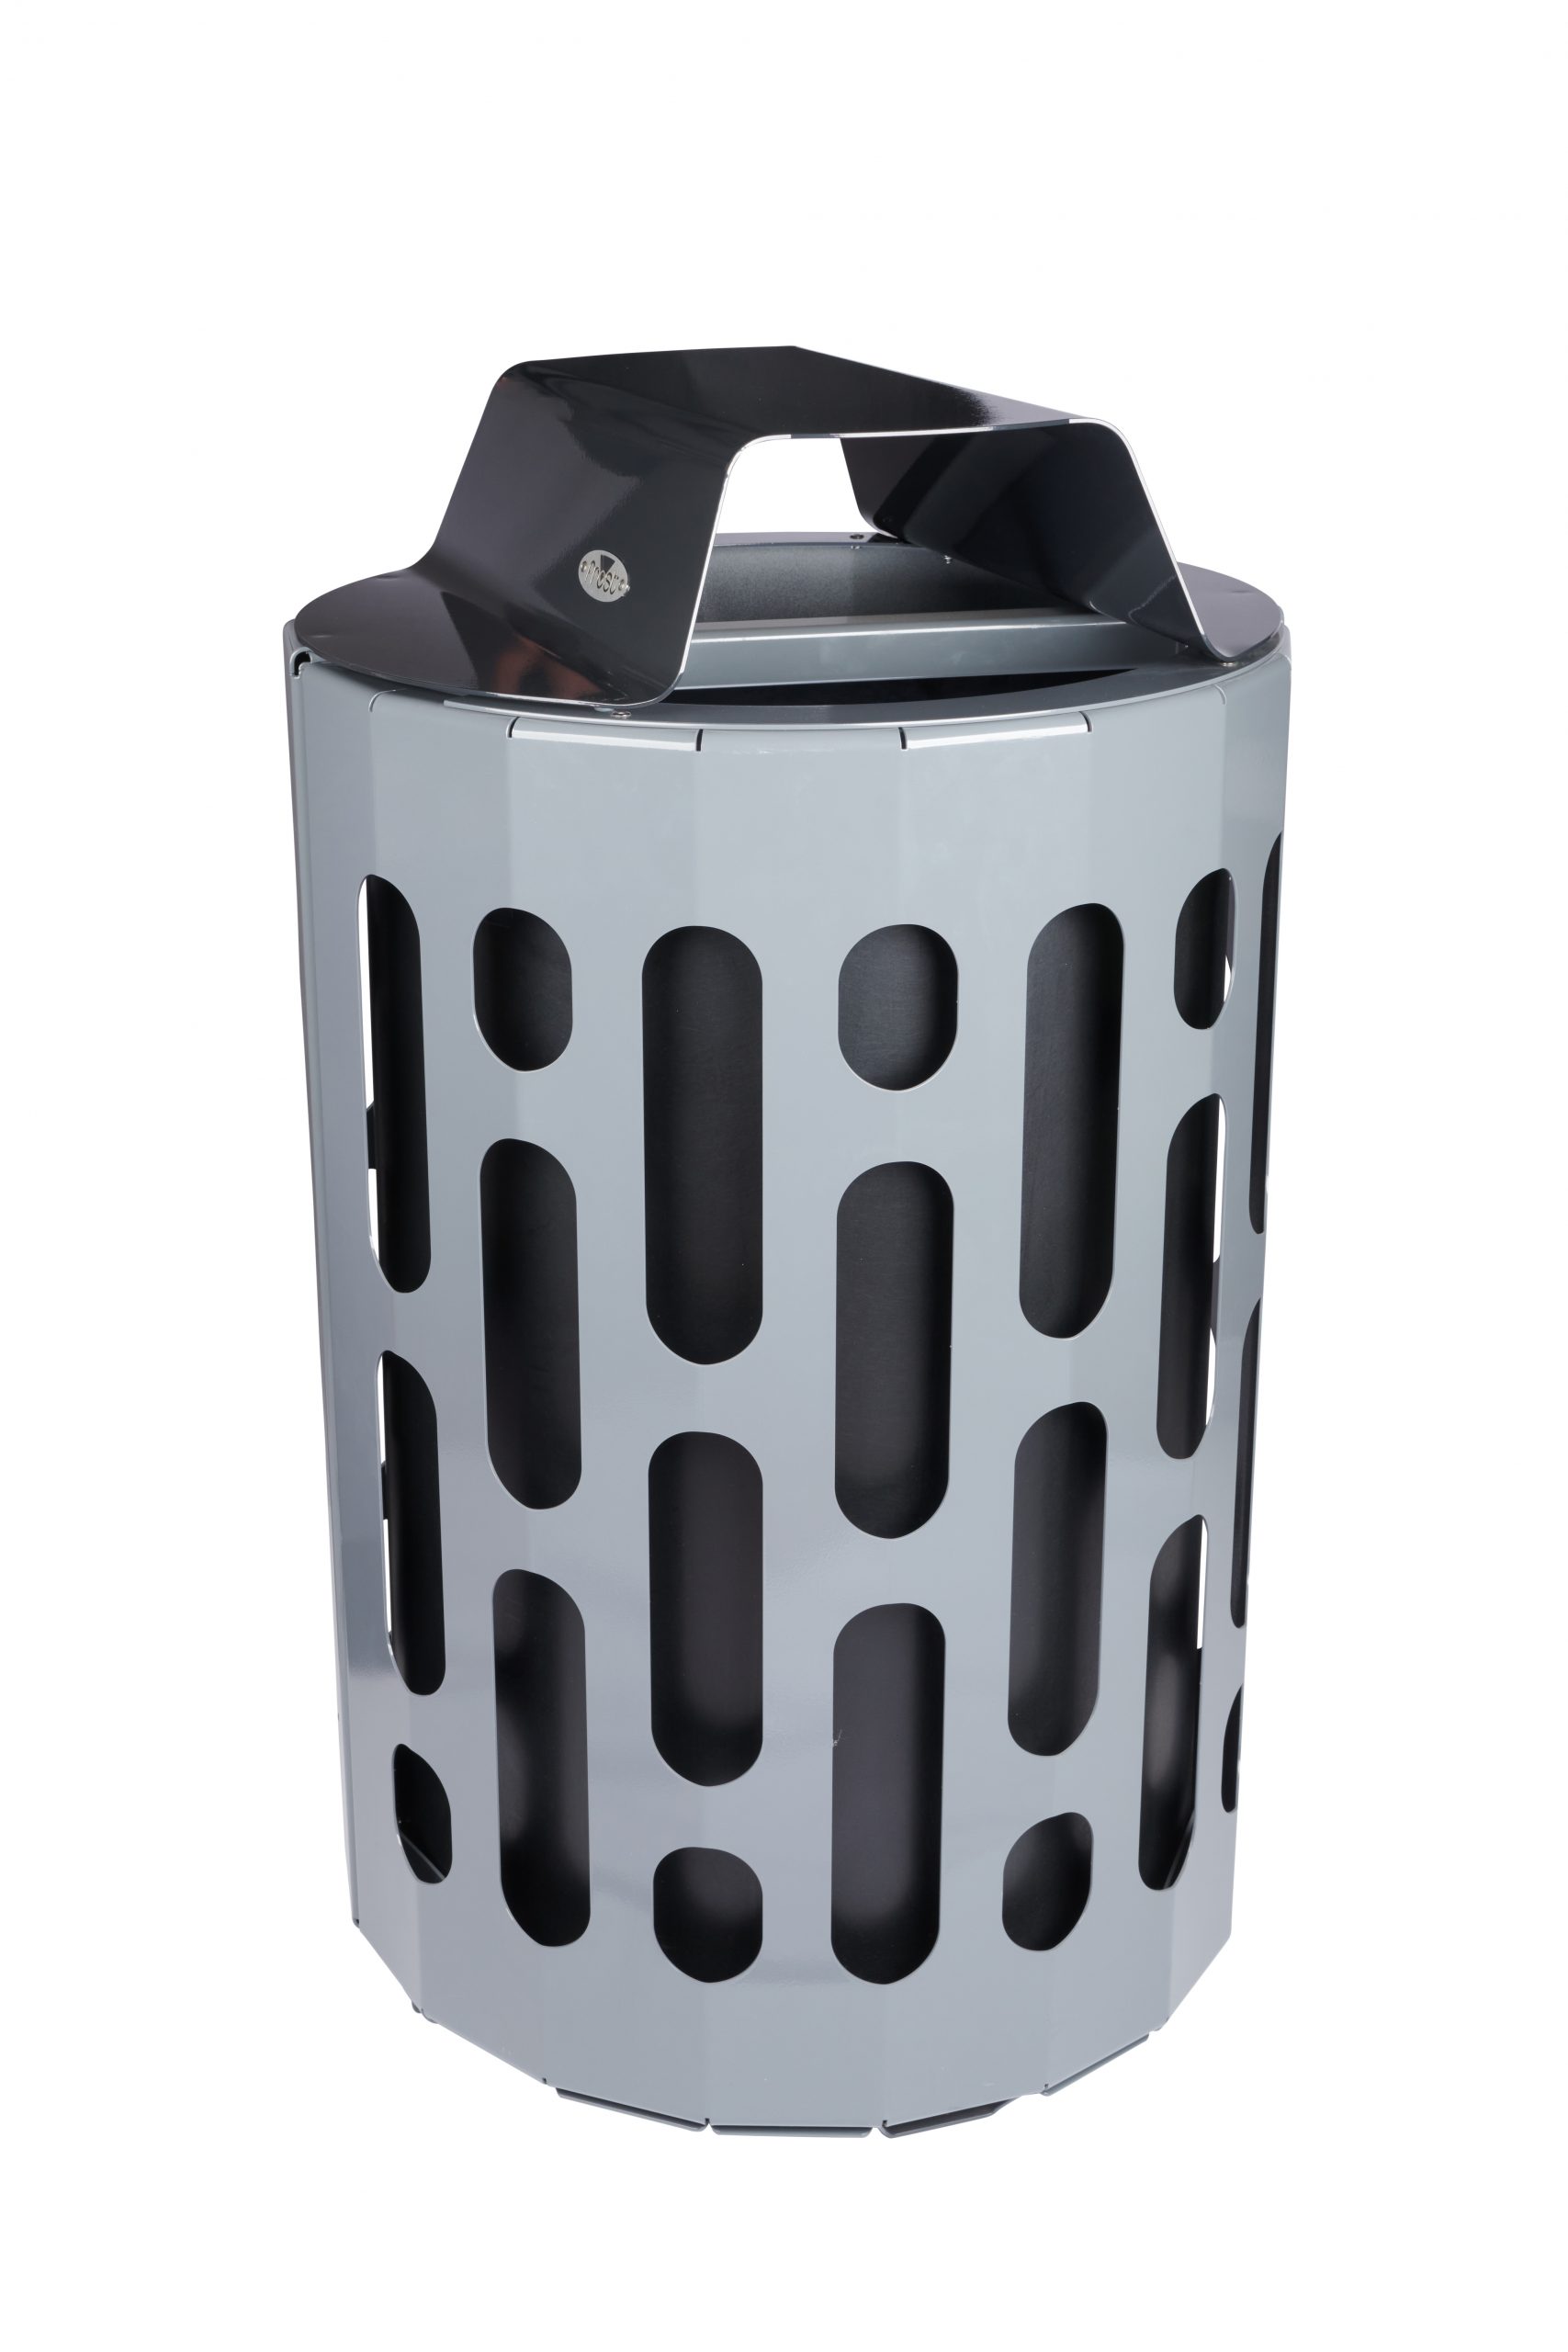 Witt Industries Mesh Steel Outdoor Trash Receptacle in Black Finish (W Name Plate/Blue)